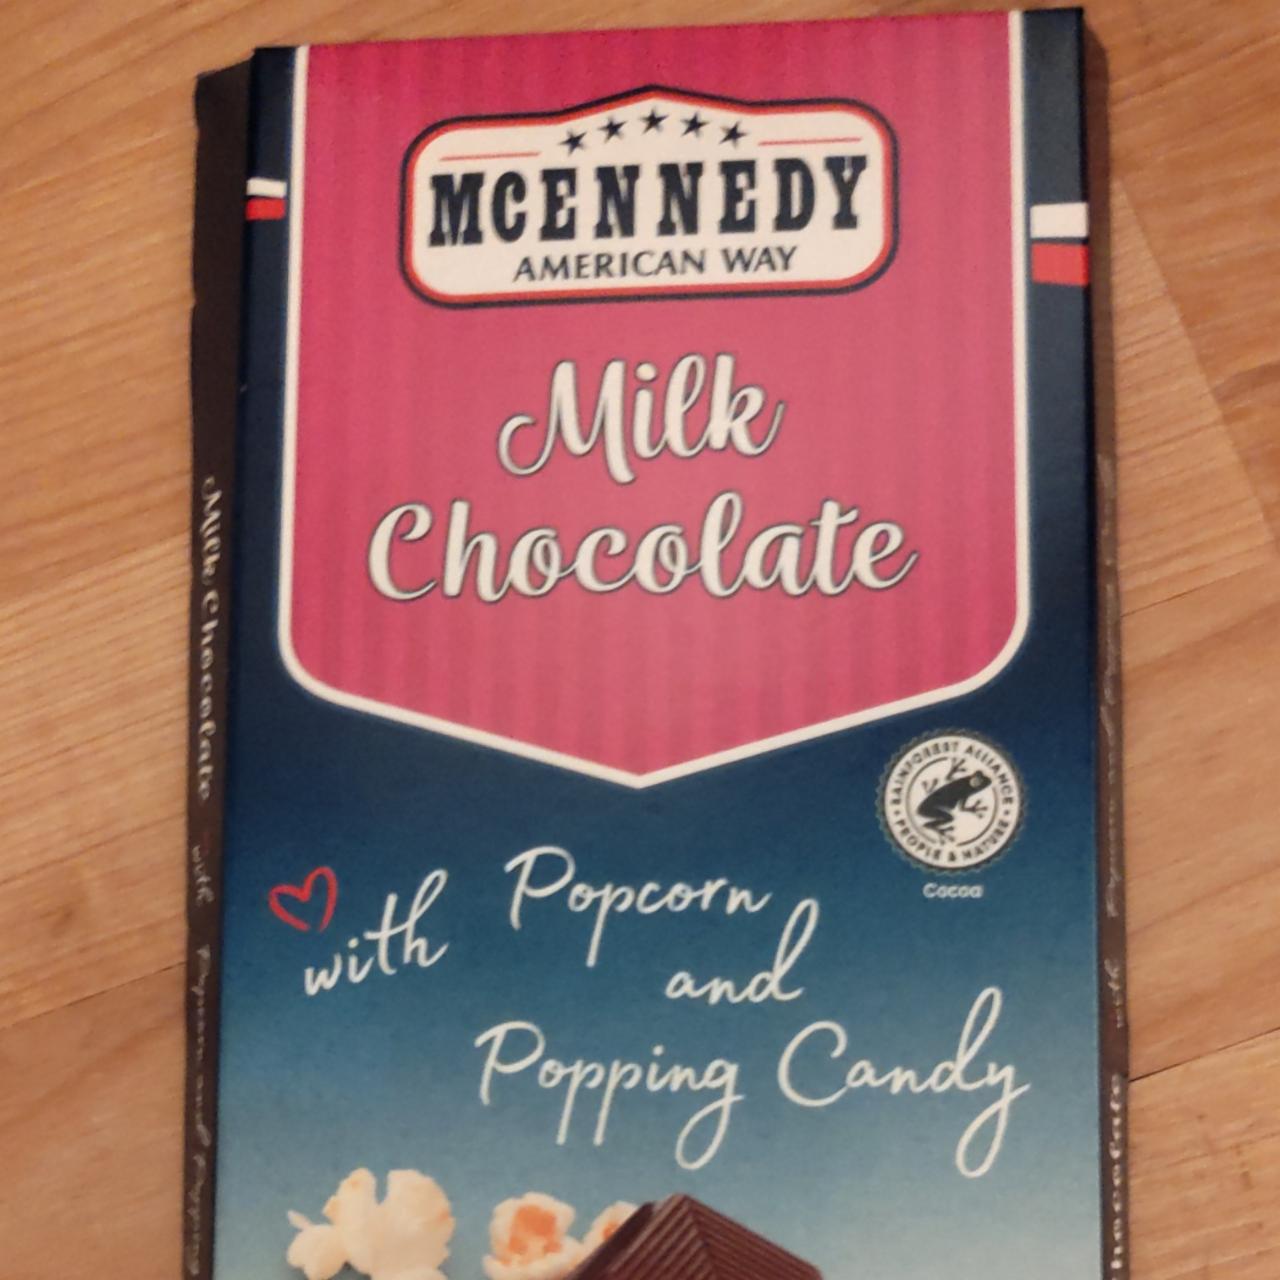 Fotografie - Milk chocolate with popcorn and popping candy McEnnedy American Way